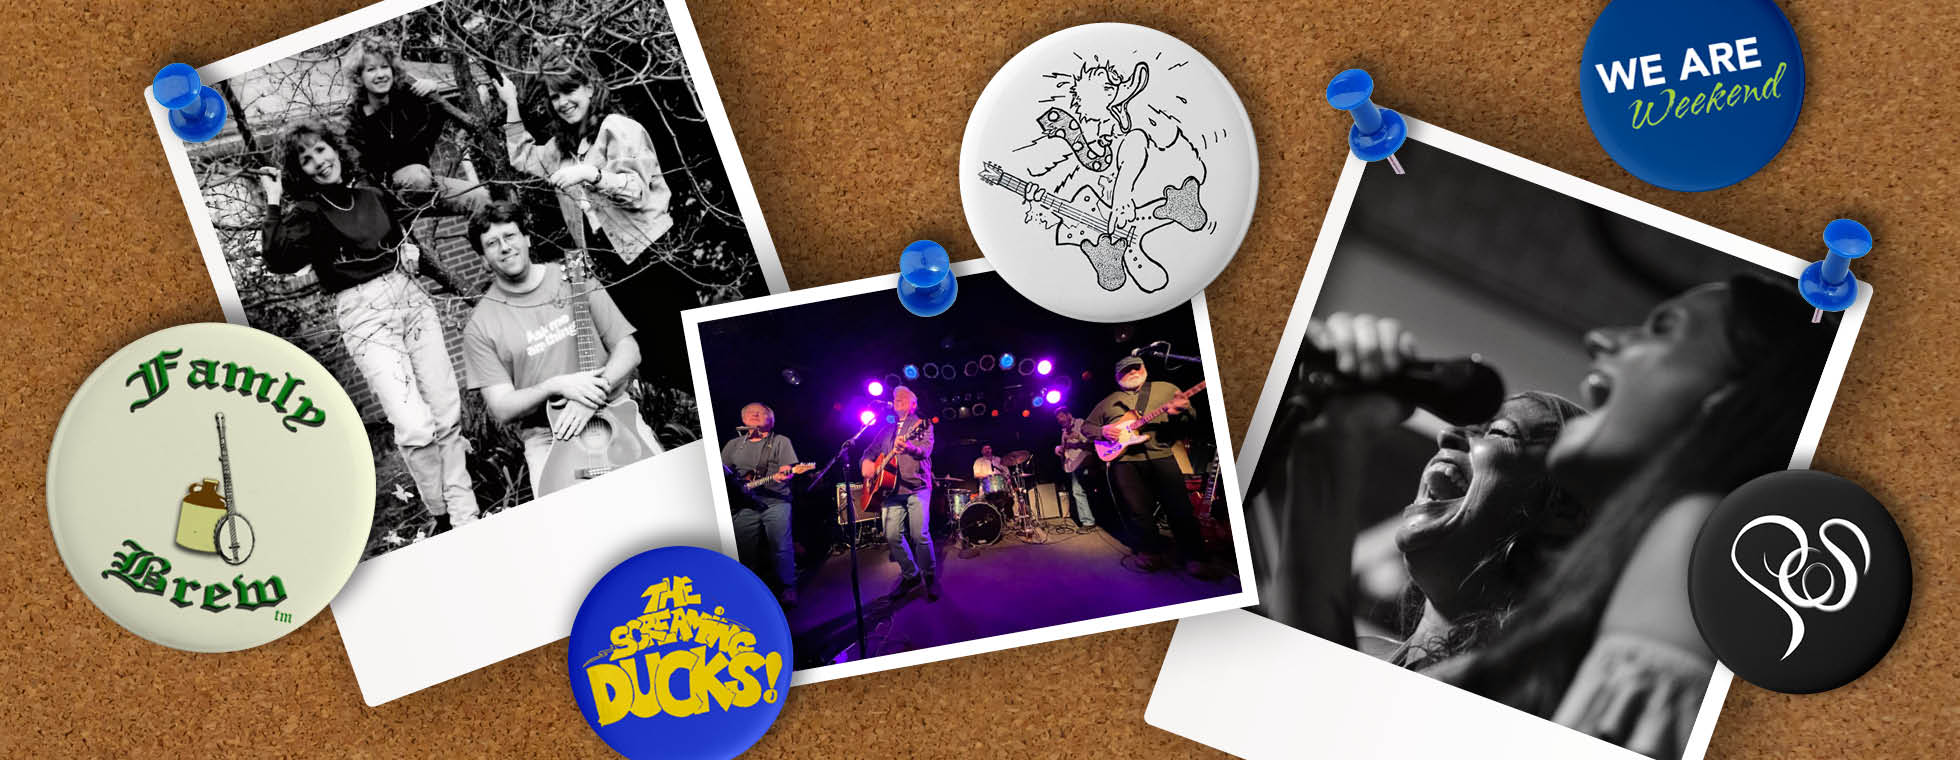 Photos of bands are pinned to a dorm cork board along with collectible badges with the bands' logos.